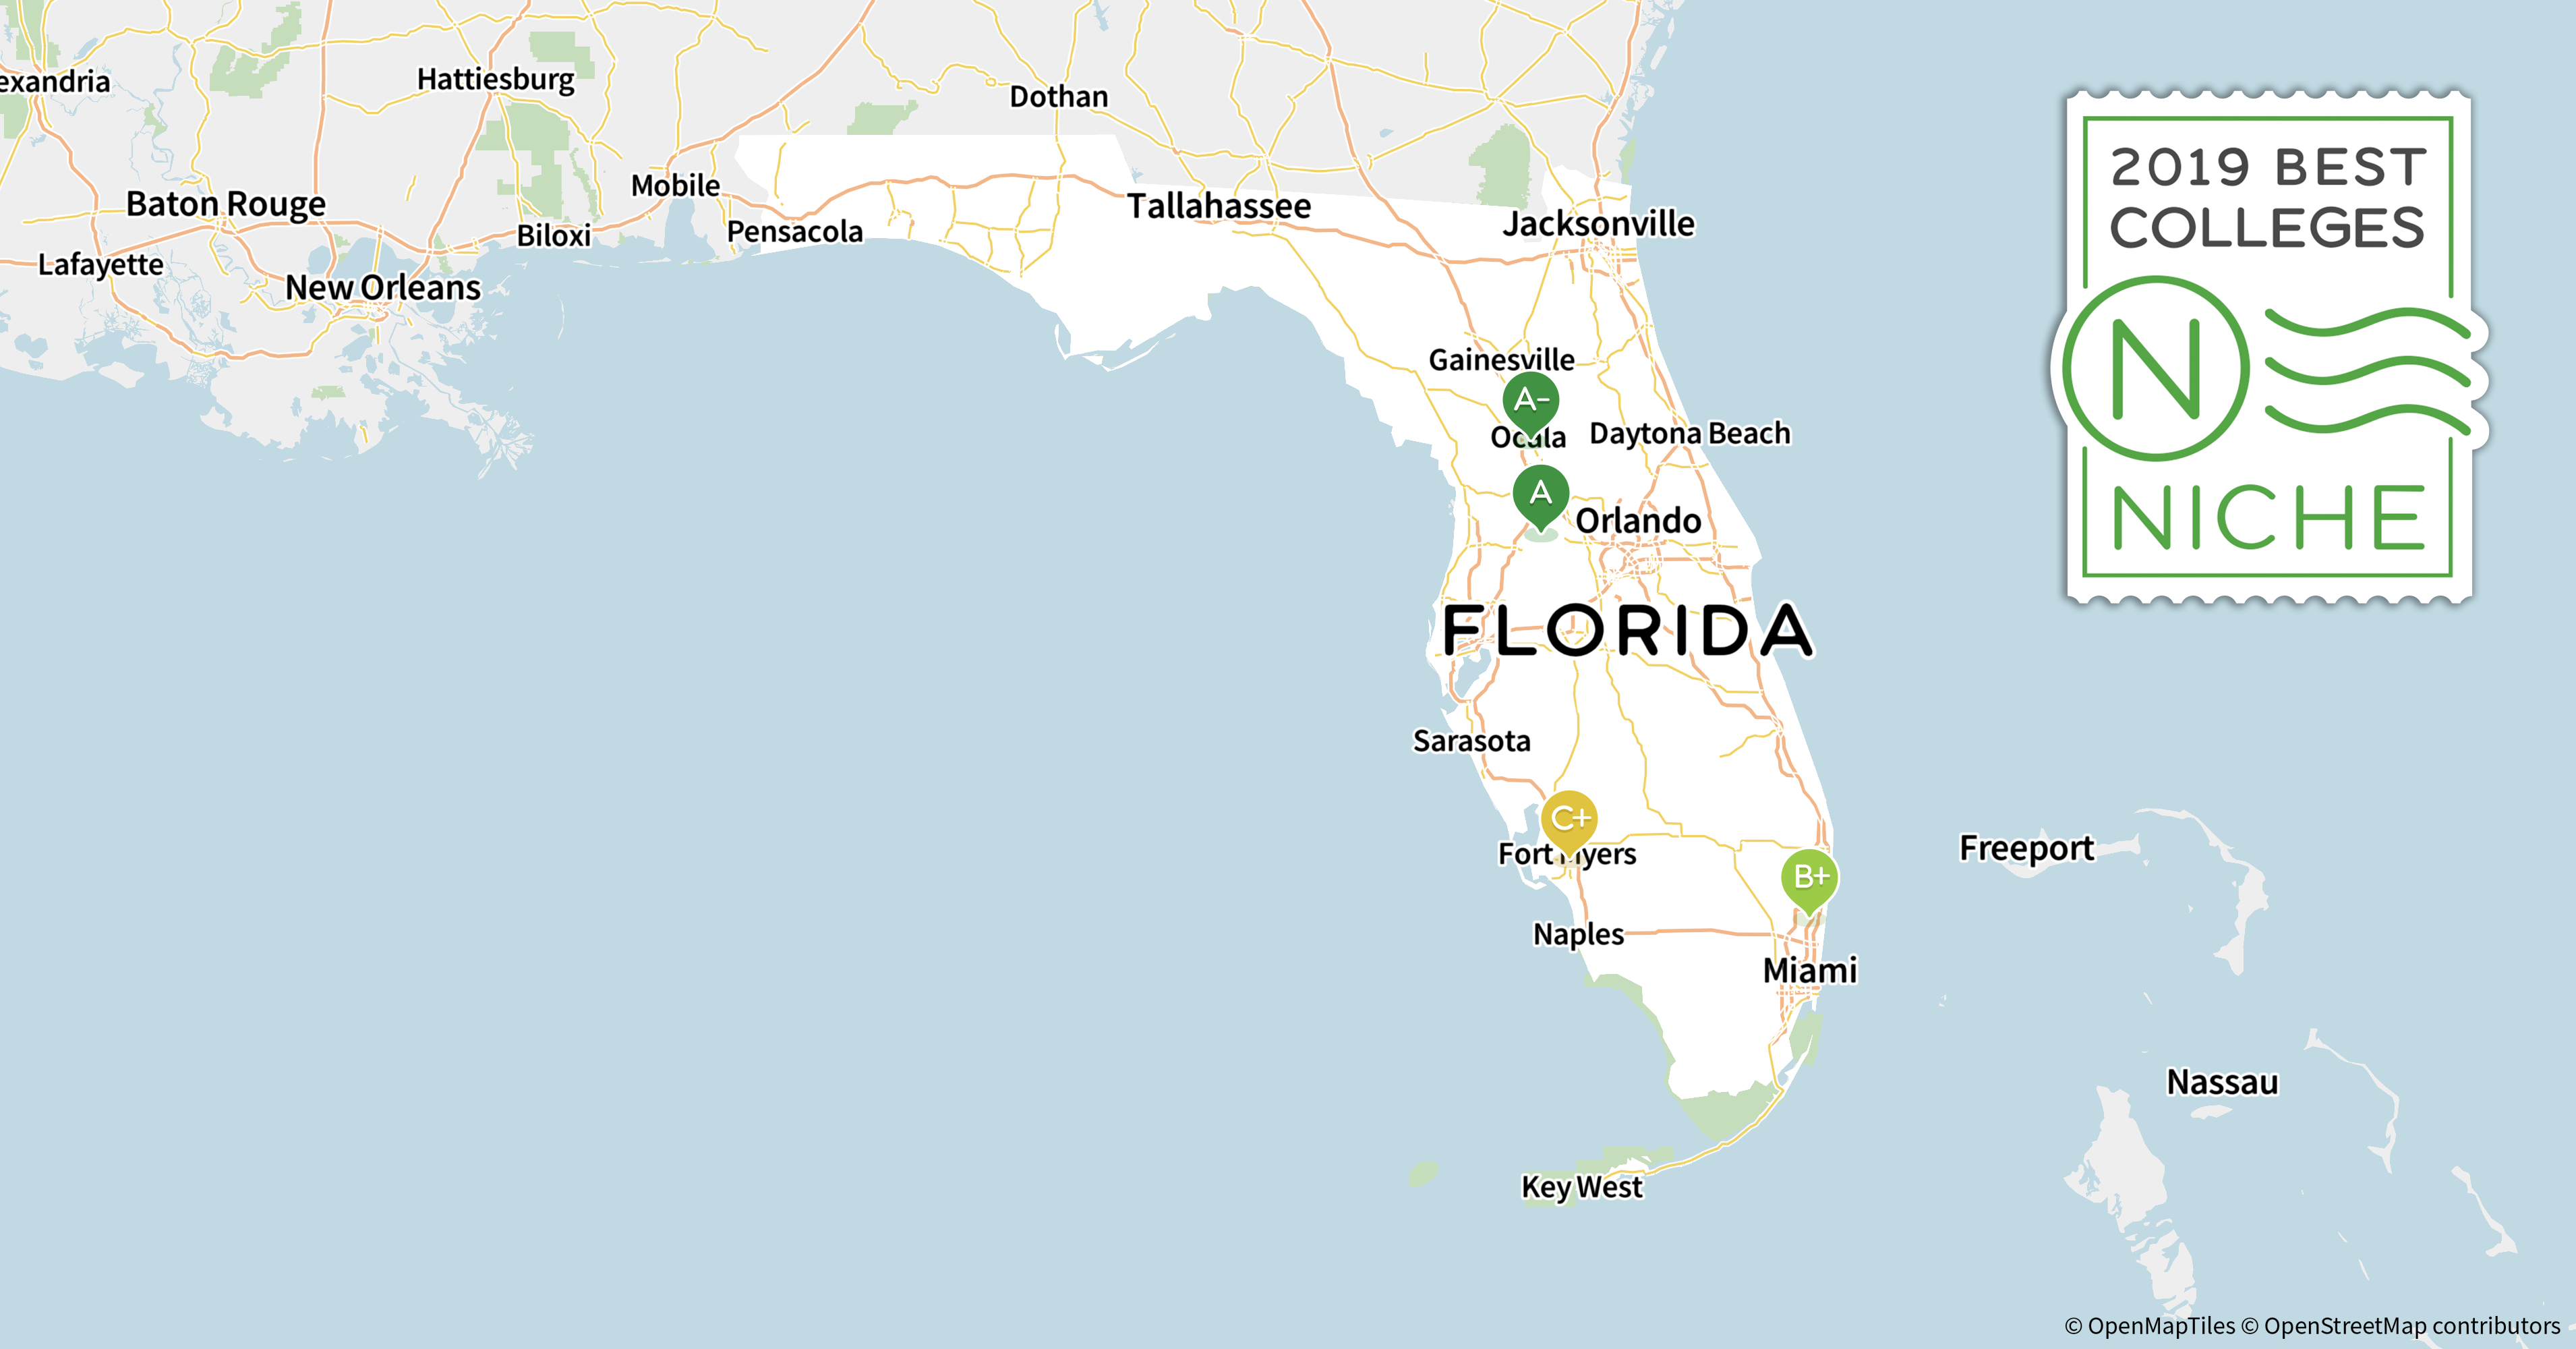 2019 Best Colleges In Florida - Niche - Where Is Gainesville Florida On The Map